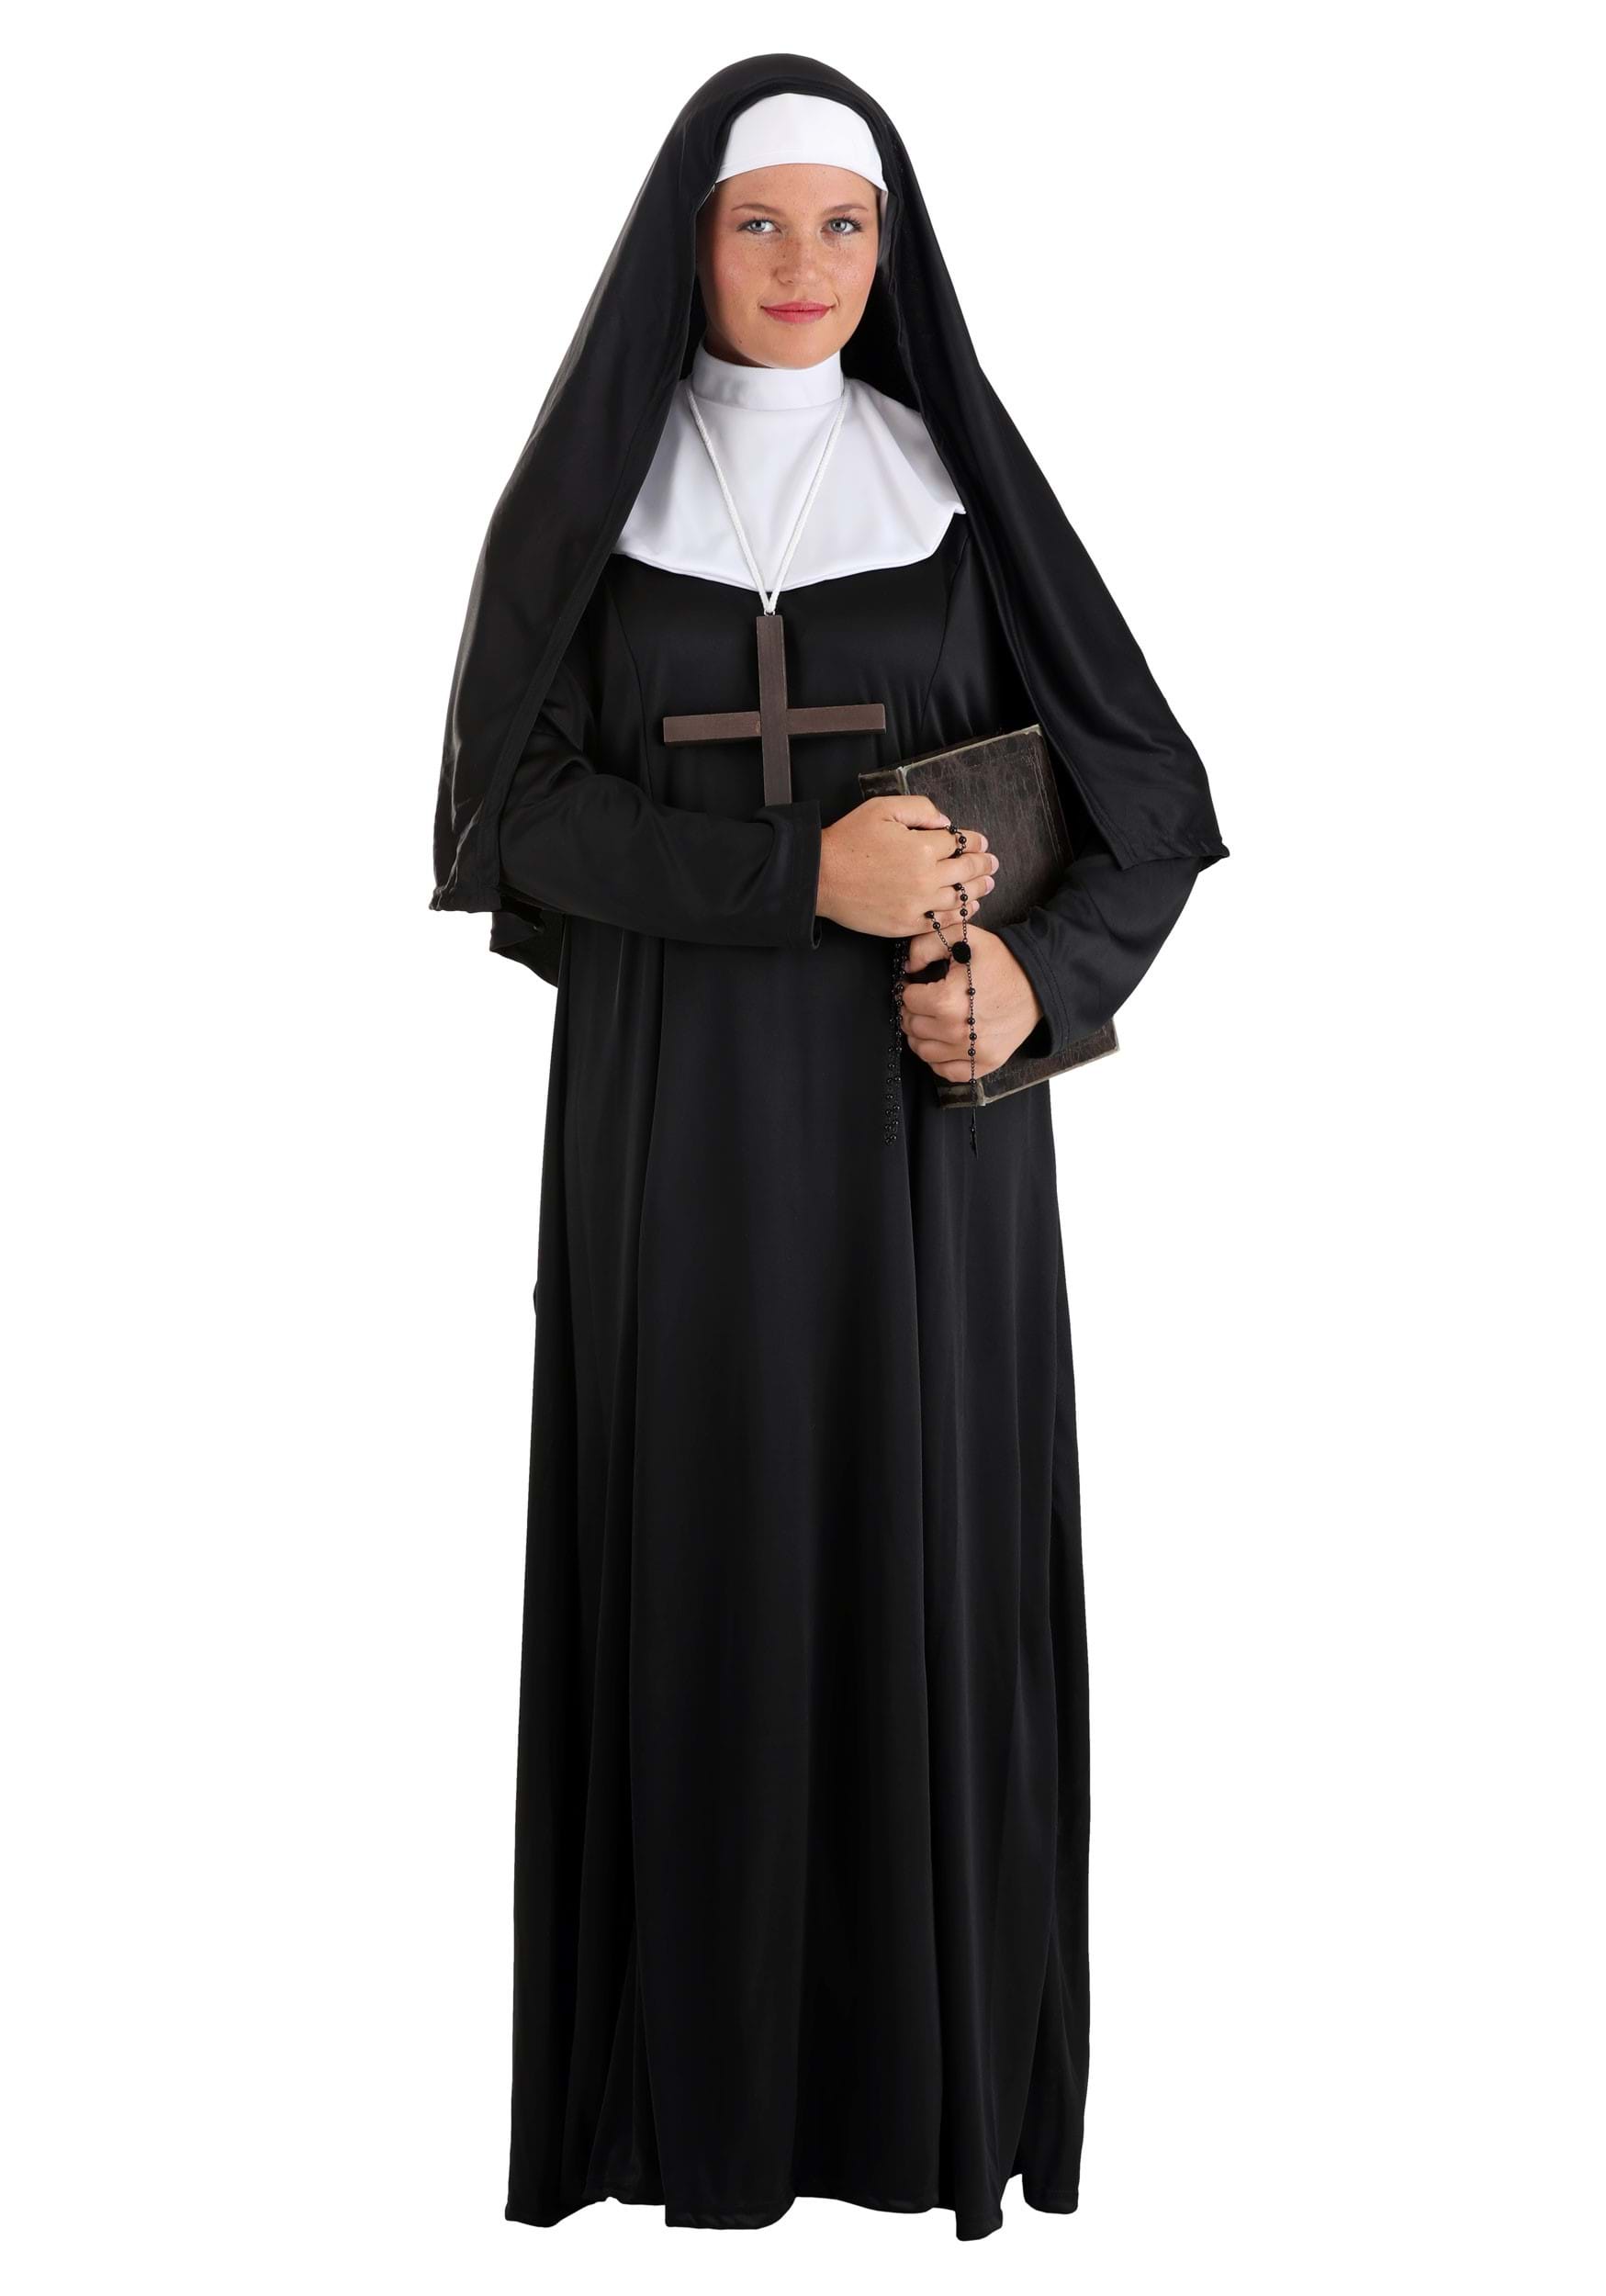 Fun Shack Womens Classic Nun Costume Adults Traditional Religious Sister Dress Outfit Medium